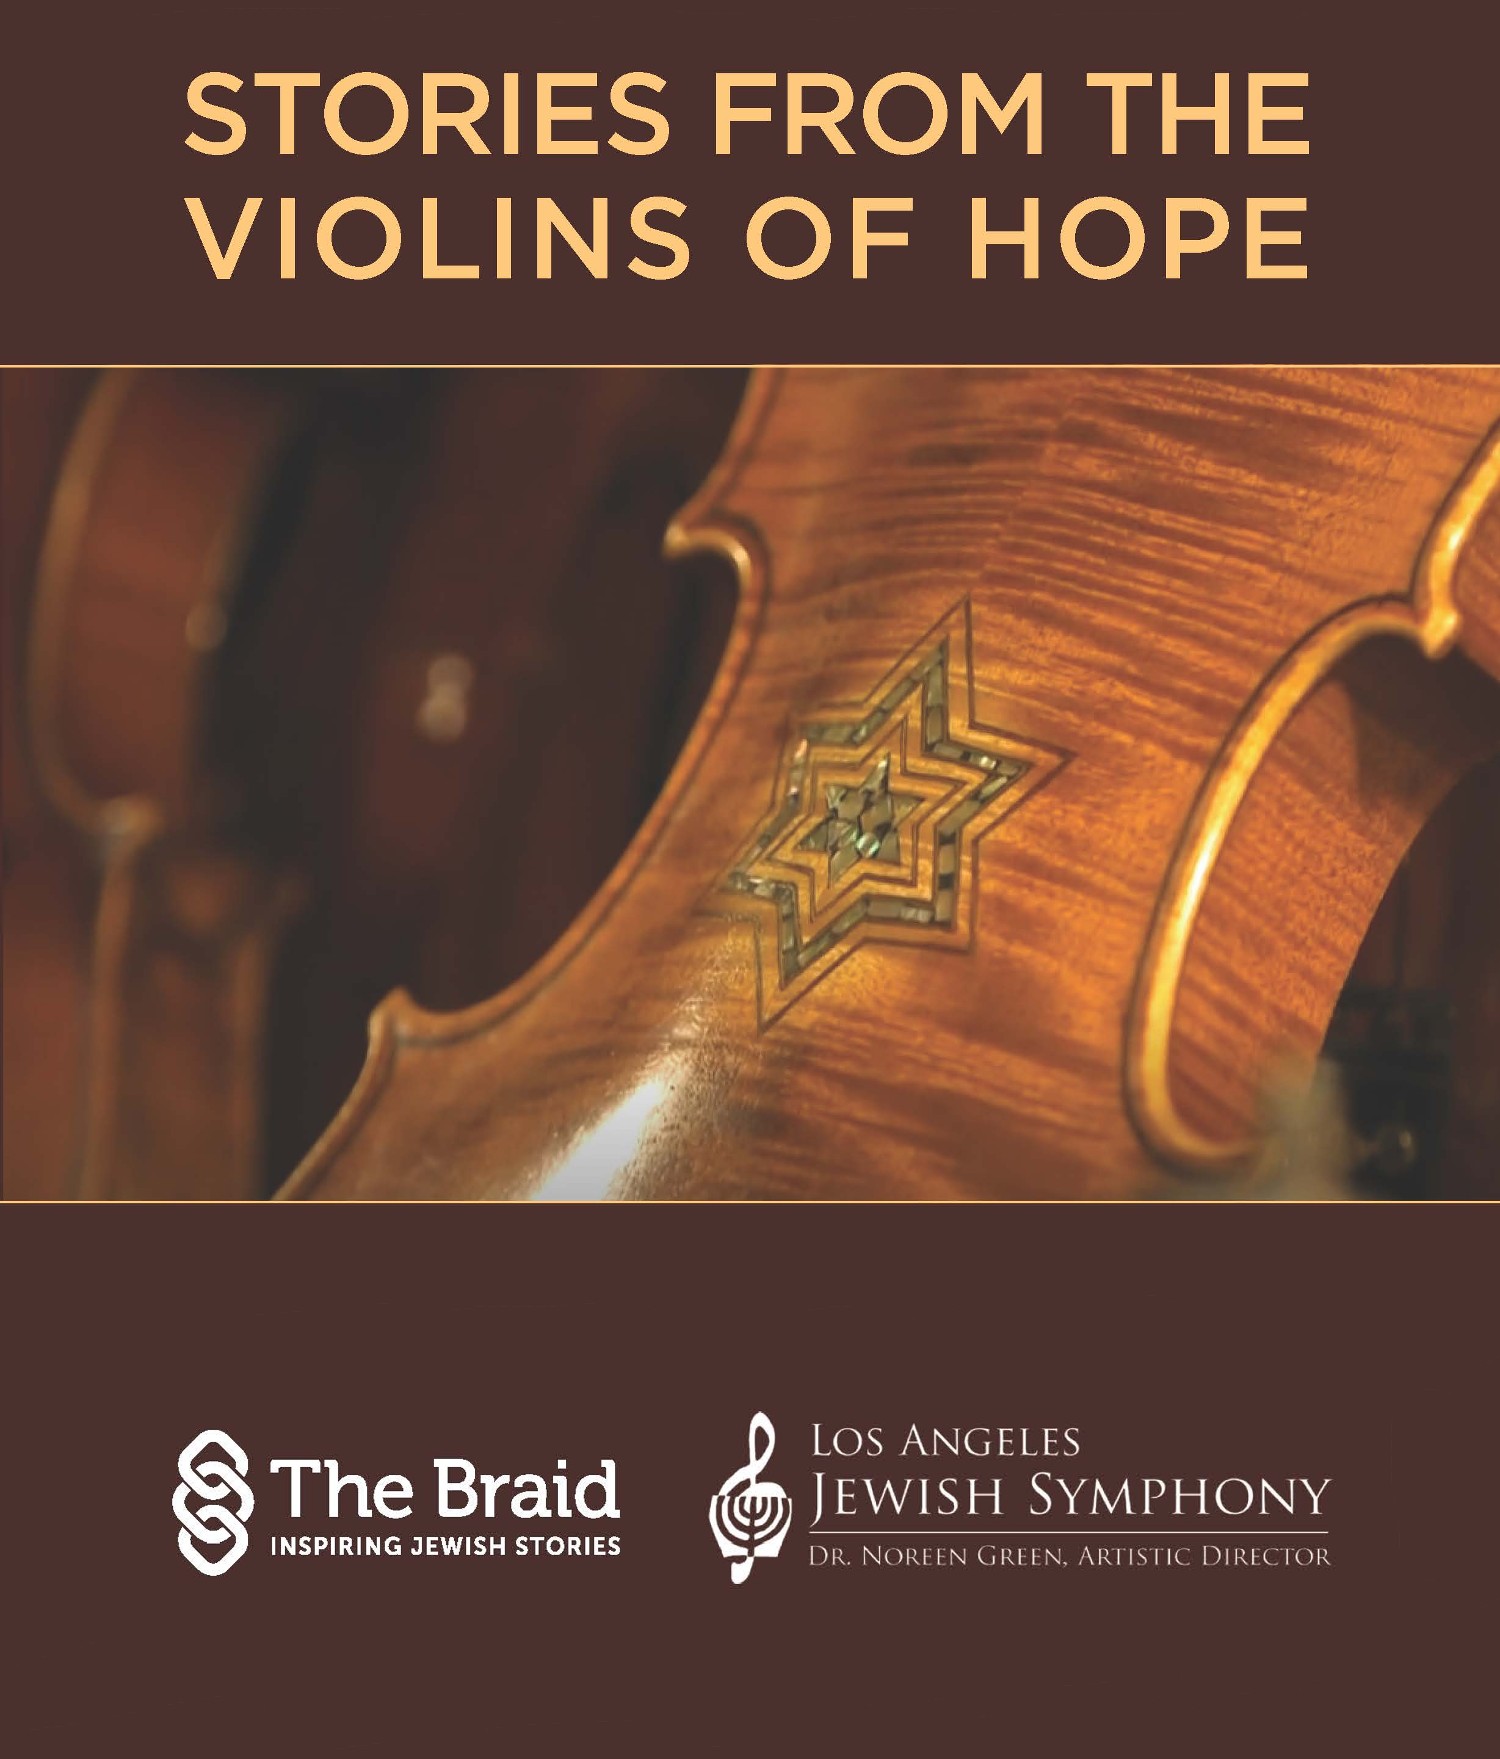 A flyer for the Stories from the Violins of Hope program.